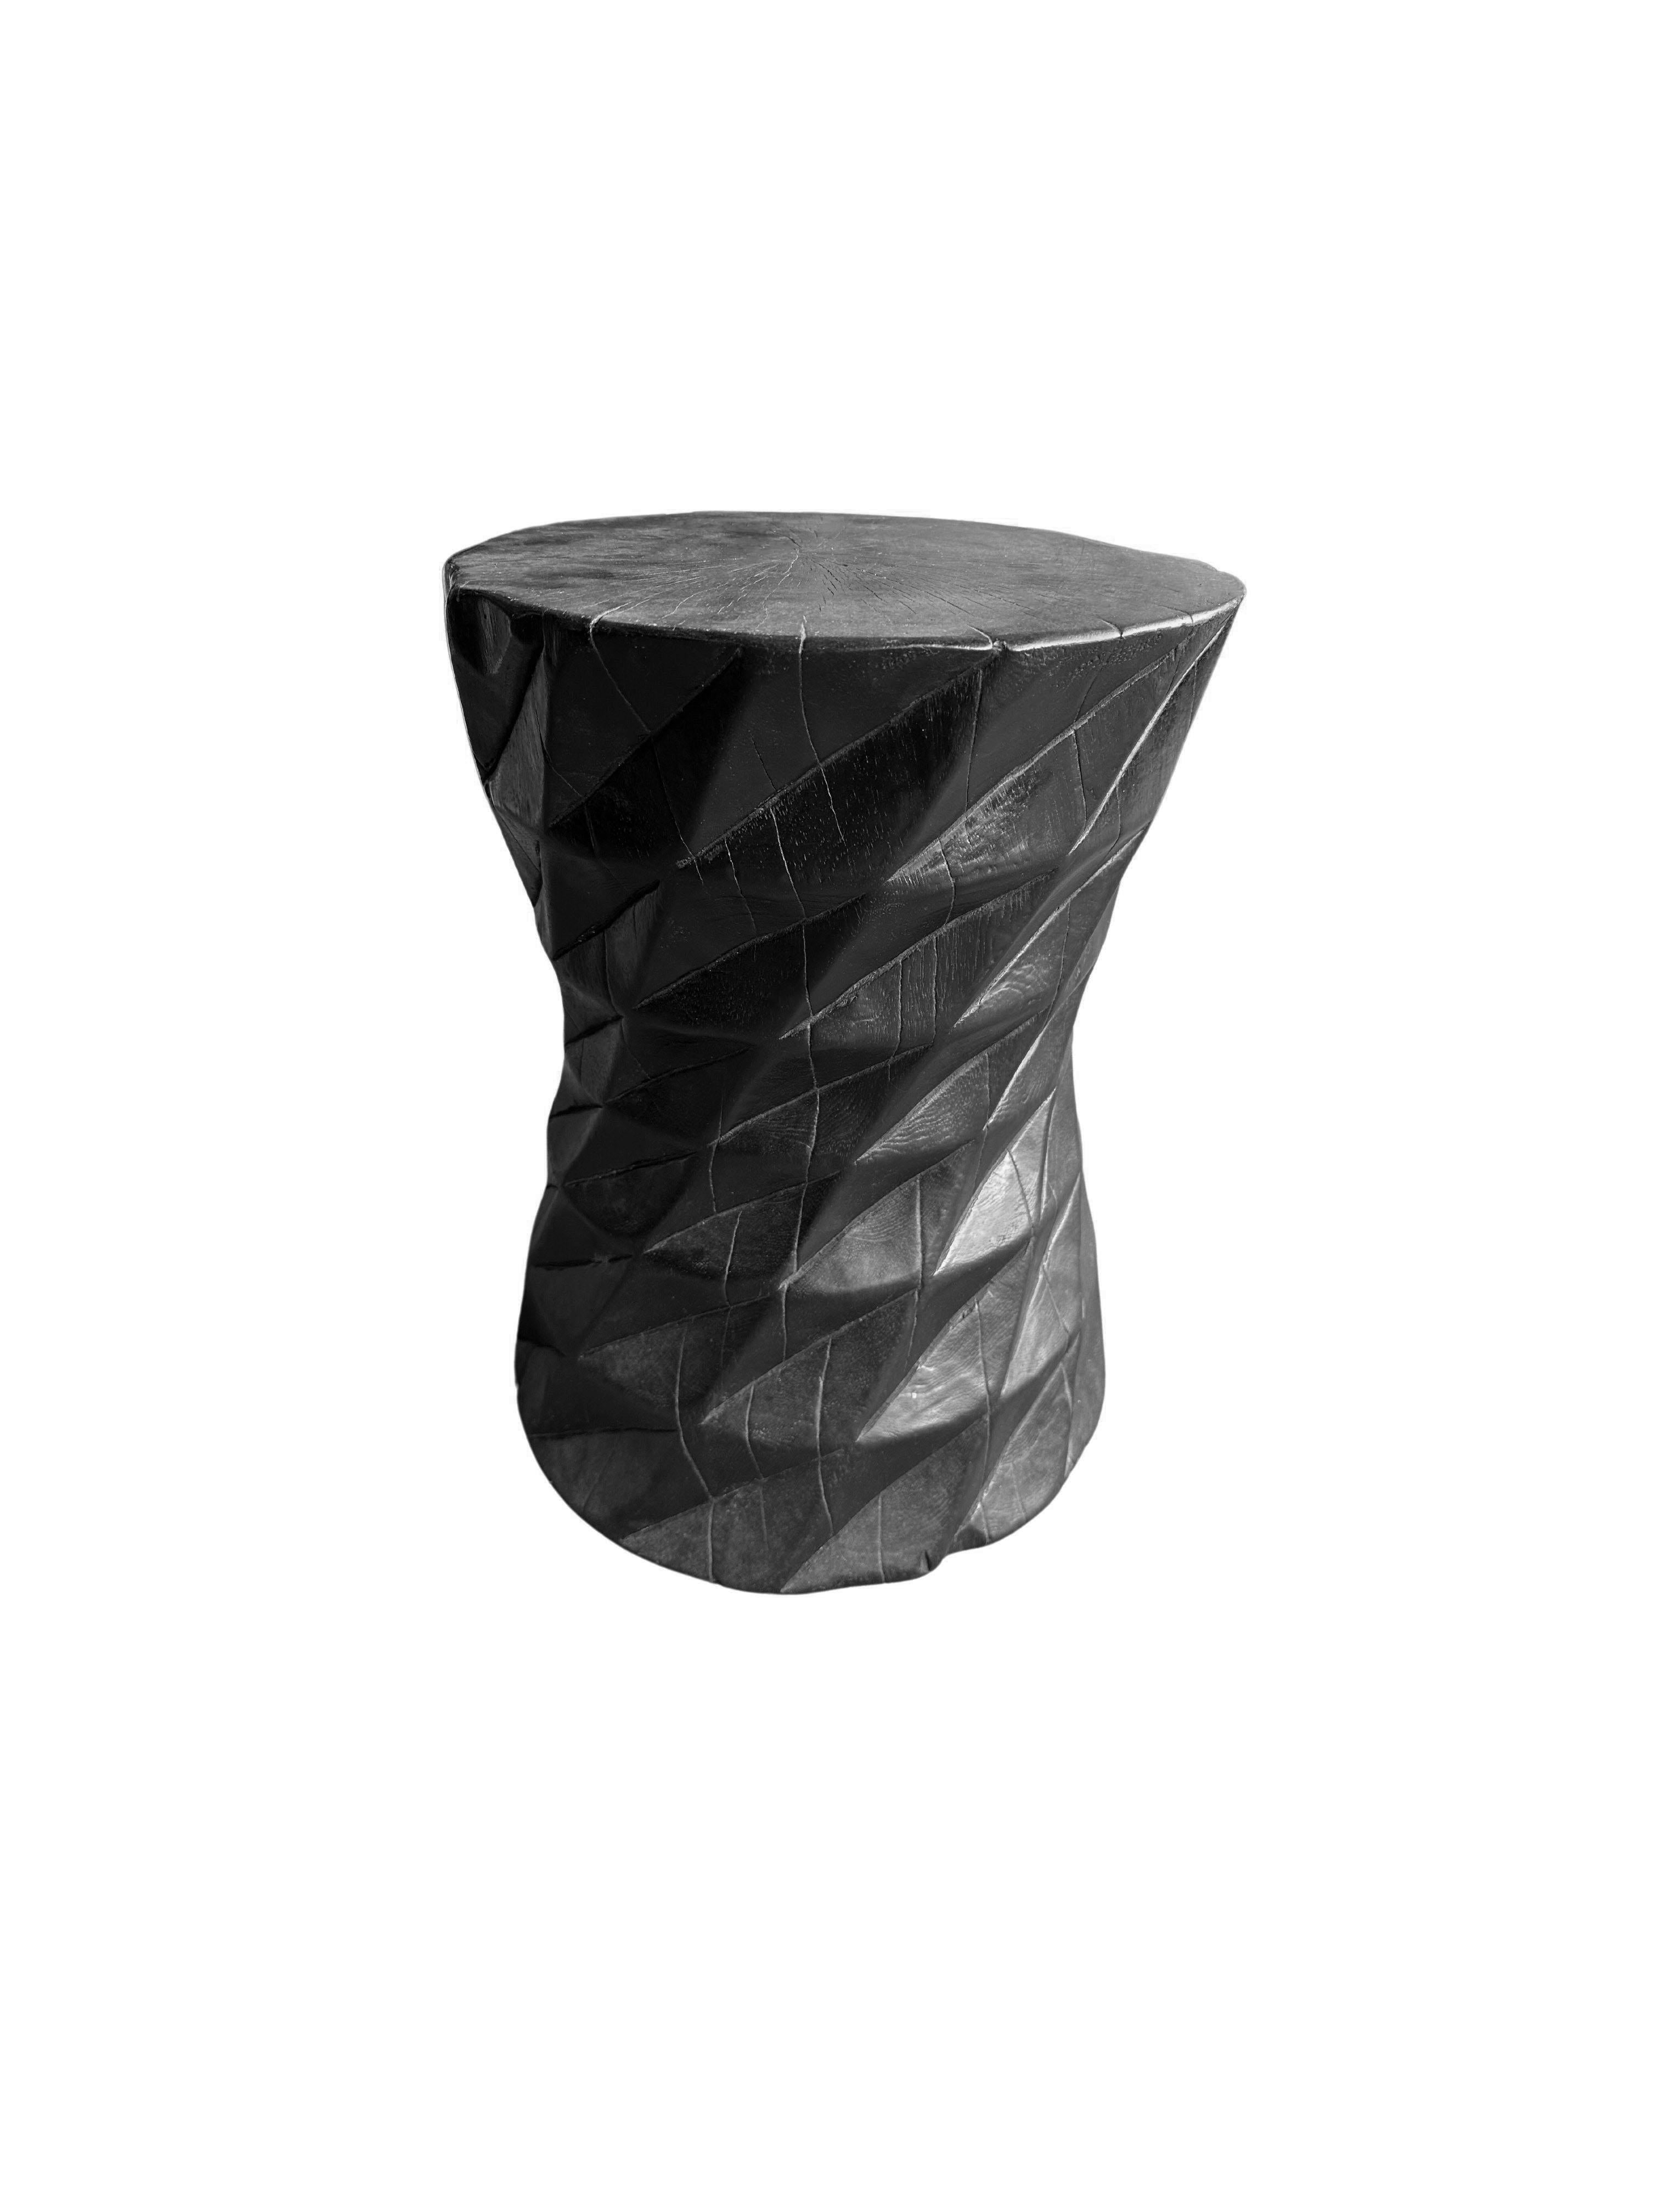 A wonderfully sculptural round side table. Its neutral pigments make it perfect for any space. It was crafted from a solid block of mango wood and features carved geometric detailing on its sides. To achieve is black color the wood was burnt three